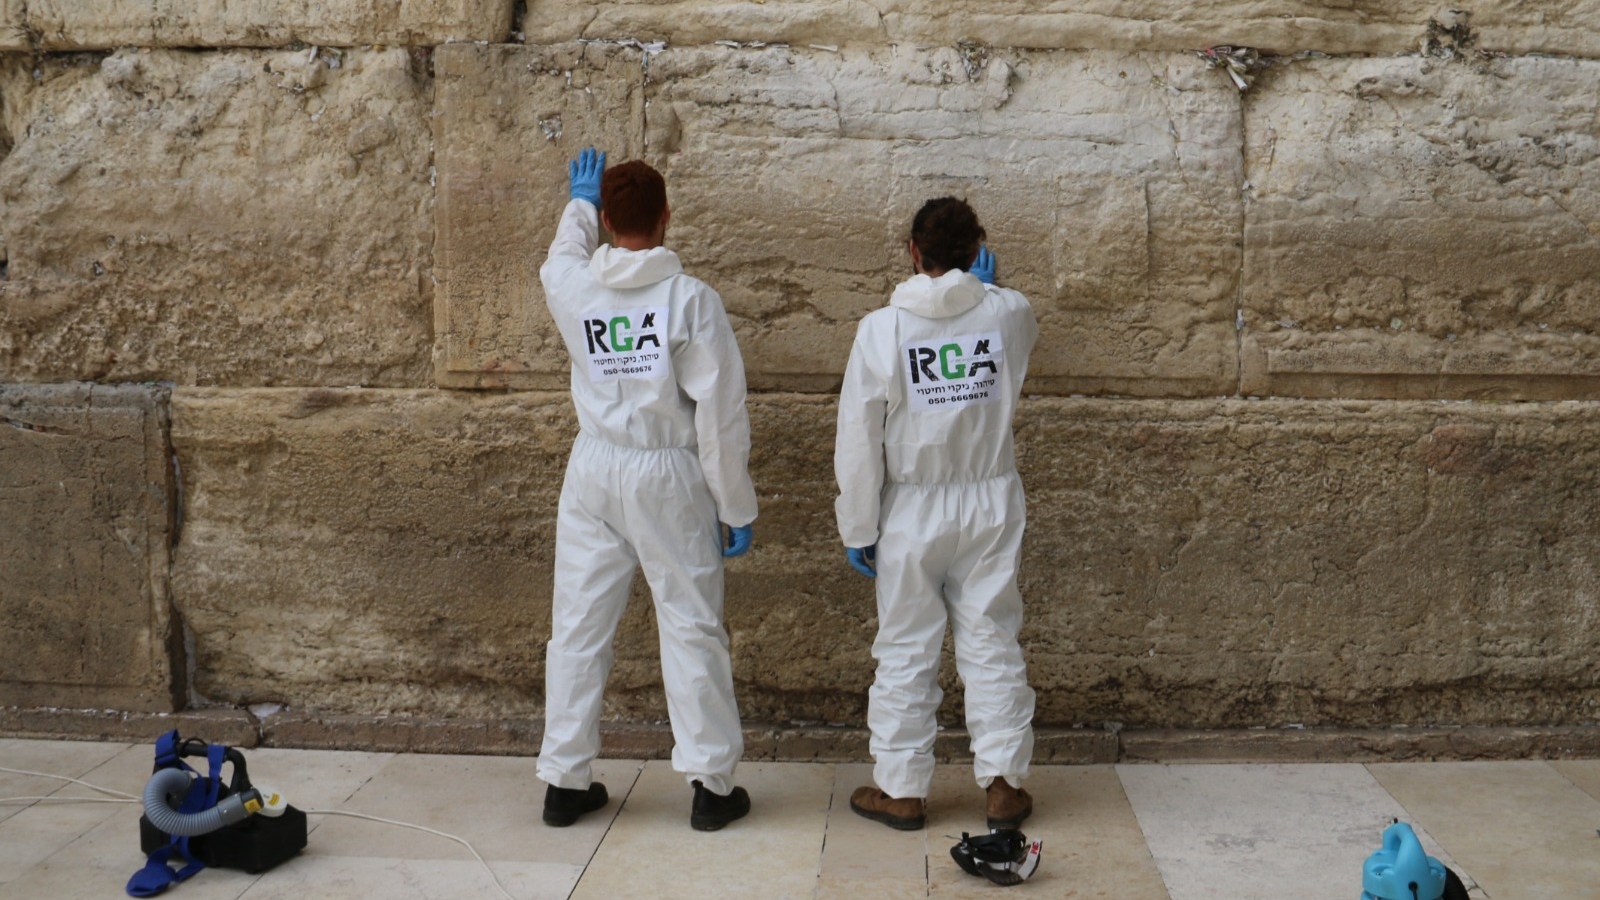 During the coronavirus pandemic, workers wore protective gear to clear notes from the Western Wall and sanitize its stones. Photo courtesy of The Western Wall Heritage Foundation